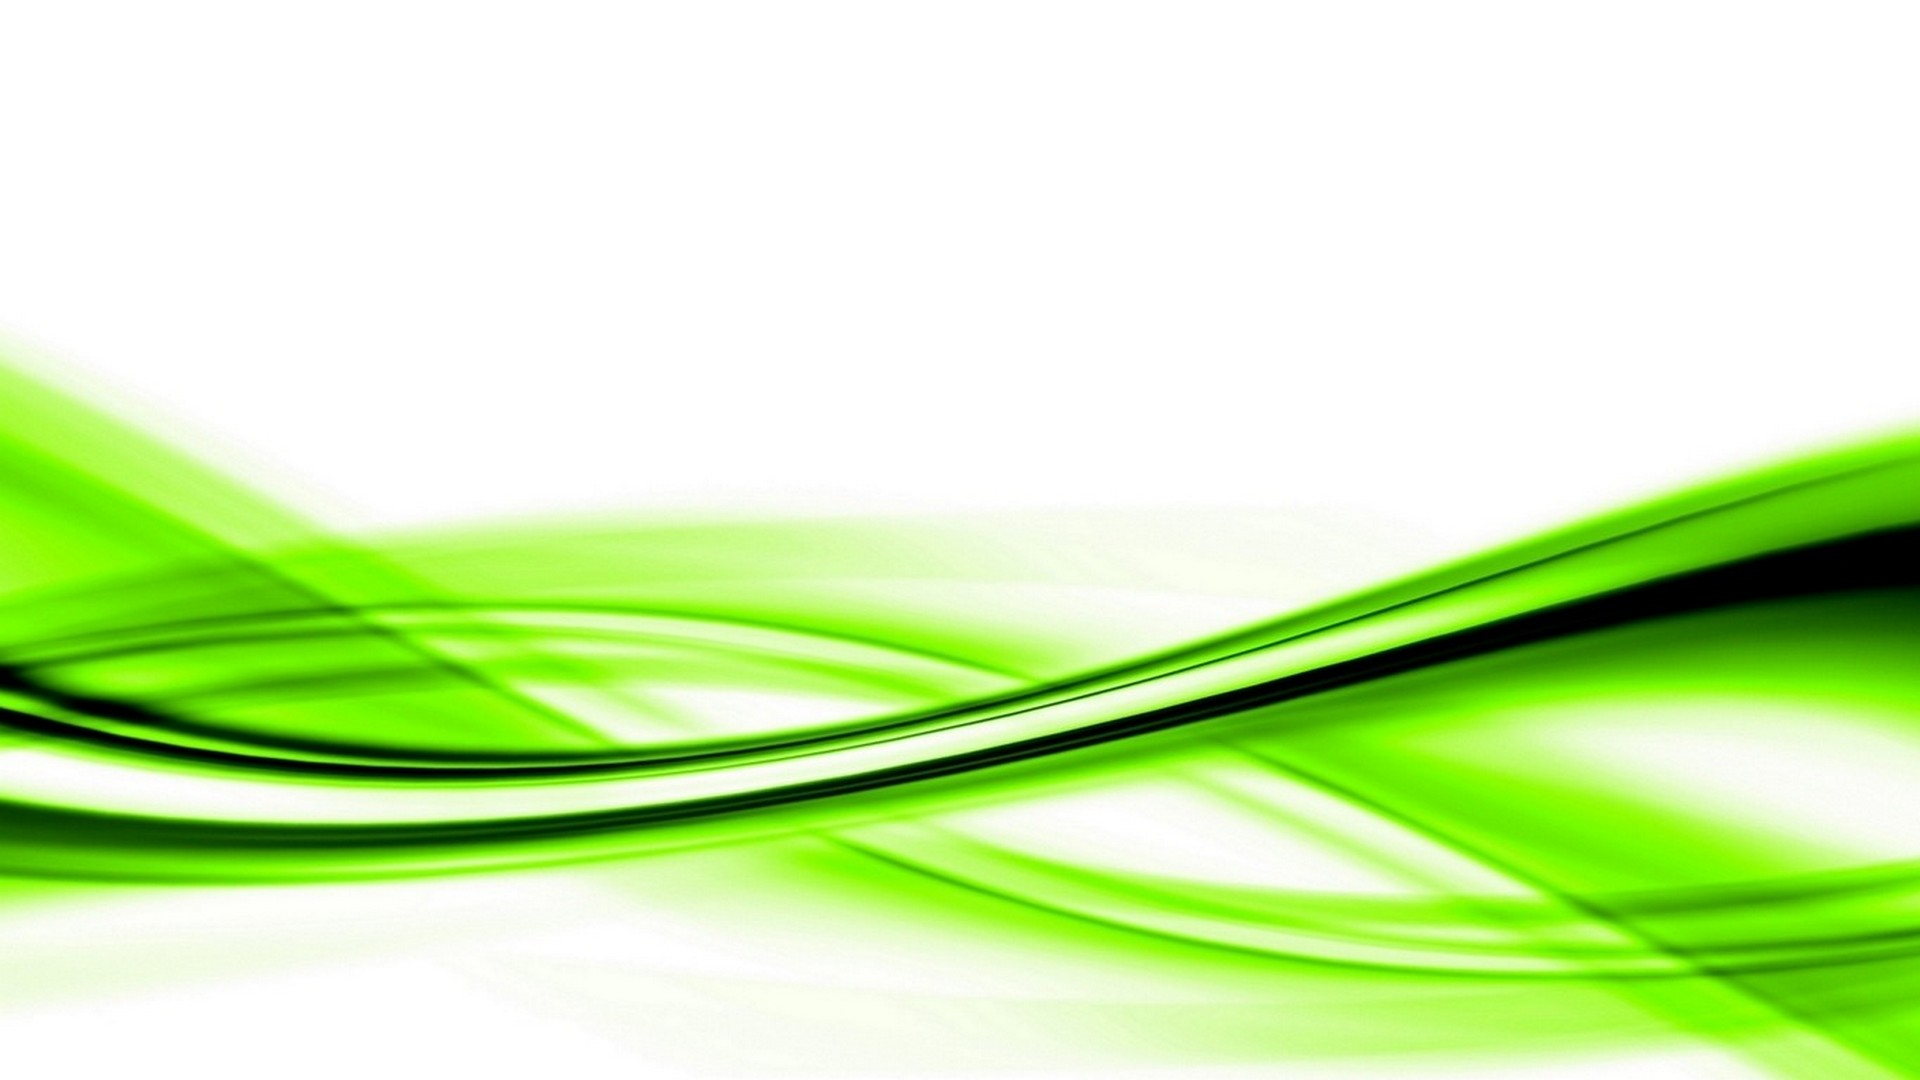 HD Light Green Backgrounds with resolution 1920X1080 pixel. You can use this wallpaper as background for your desktop Computer Screensavers, Android or iPhone smartphones